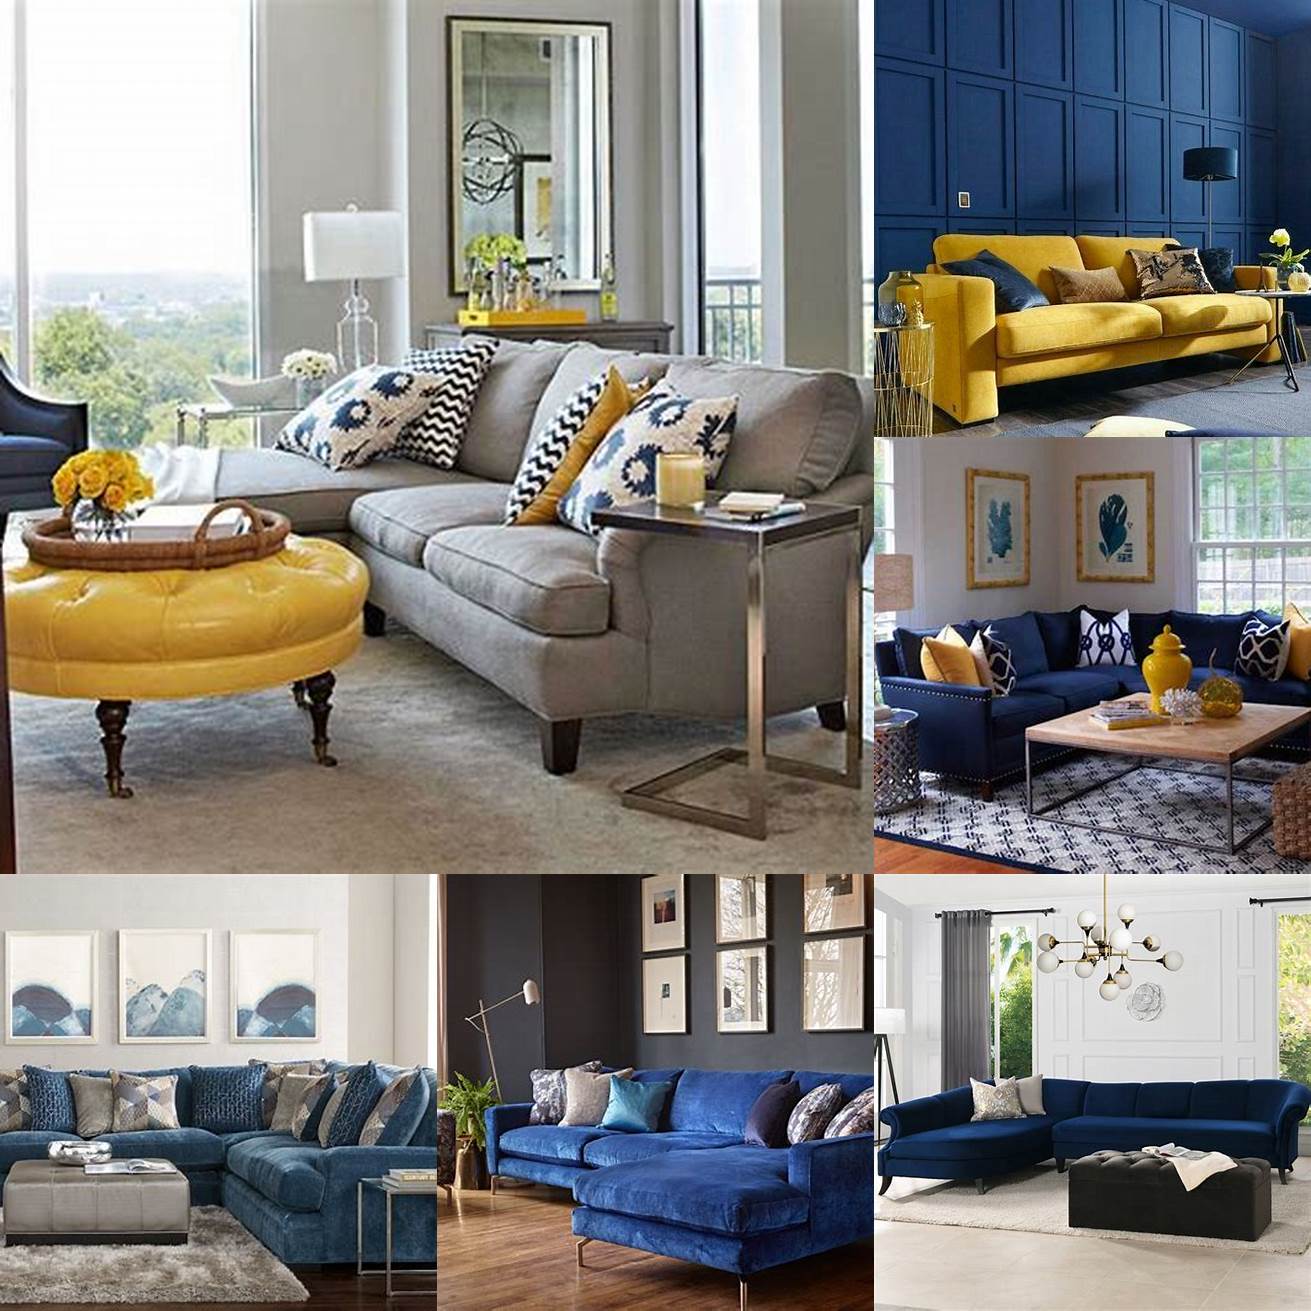 A yellow sectional sofa paired with a navy blue wall and gold accents